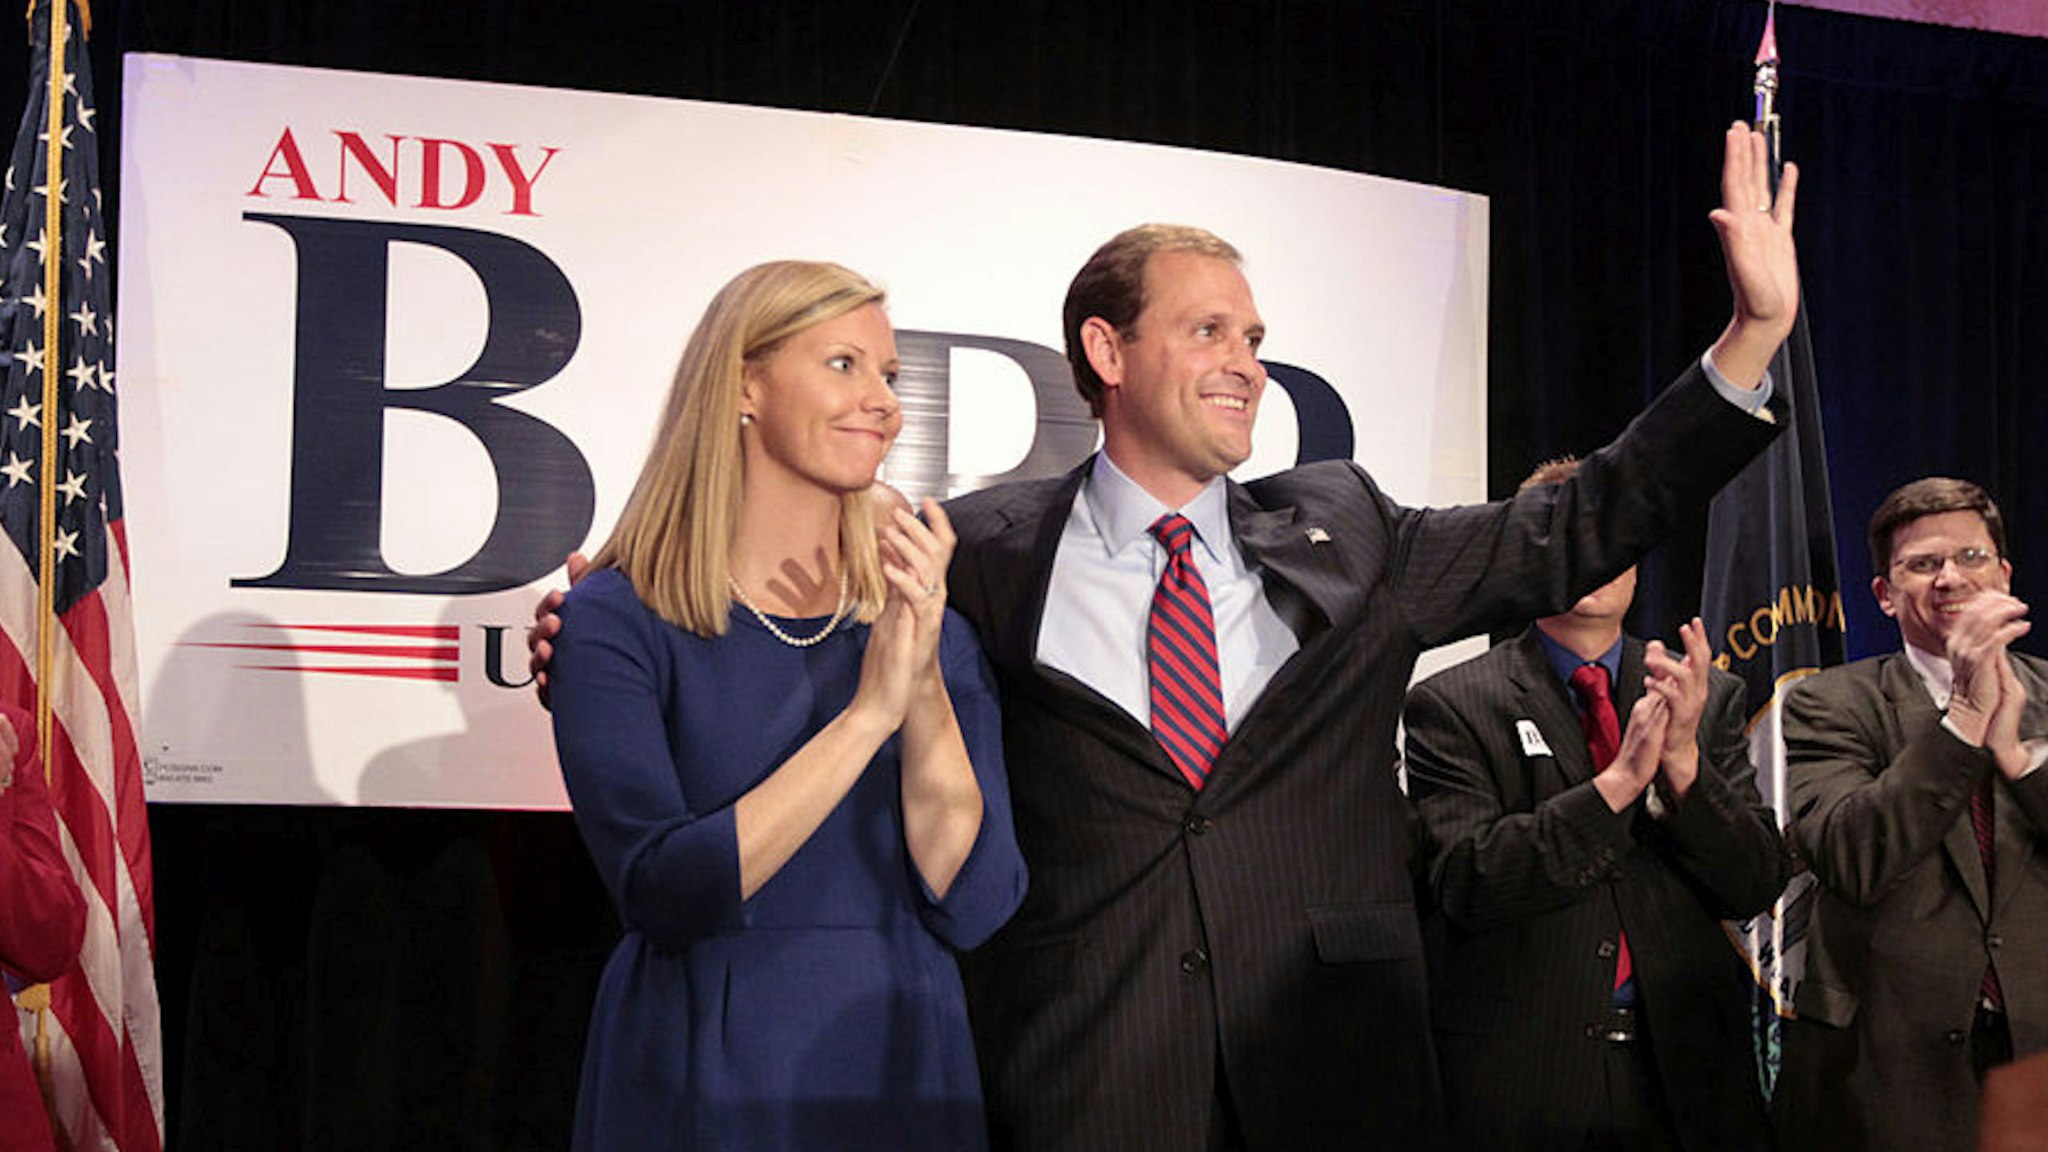 Republican Andy Barr, with wife Carol Barr, was congratulated by supporters after unseating Ben Chandler for Kentucky's 6th Congressional District in Lexington, Kentucky, on Tuesday, November 6, 2012.